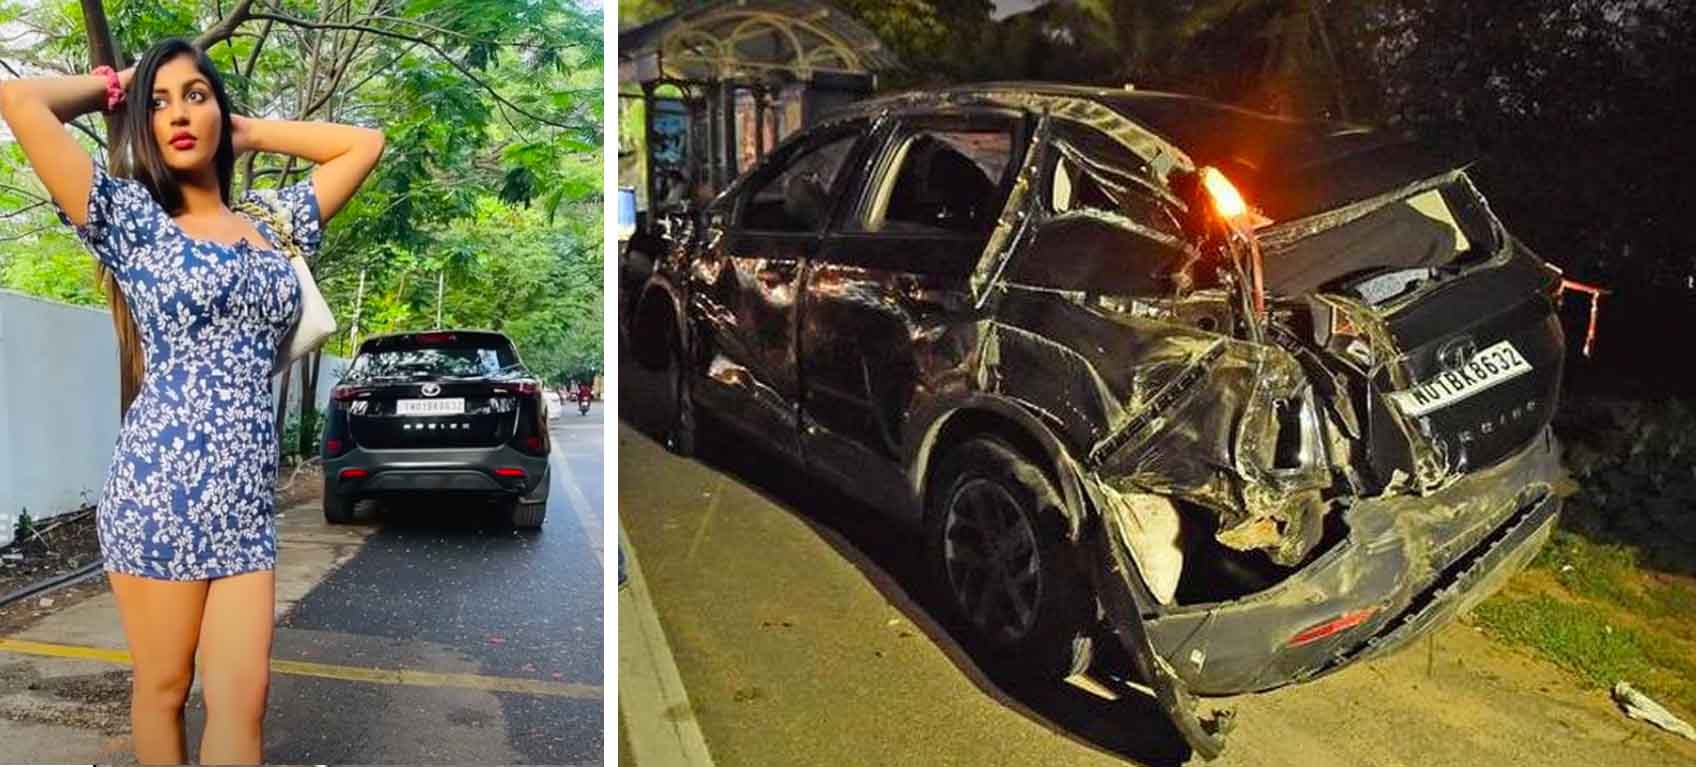 Yashika Aannand Tata Harrier Accident Images